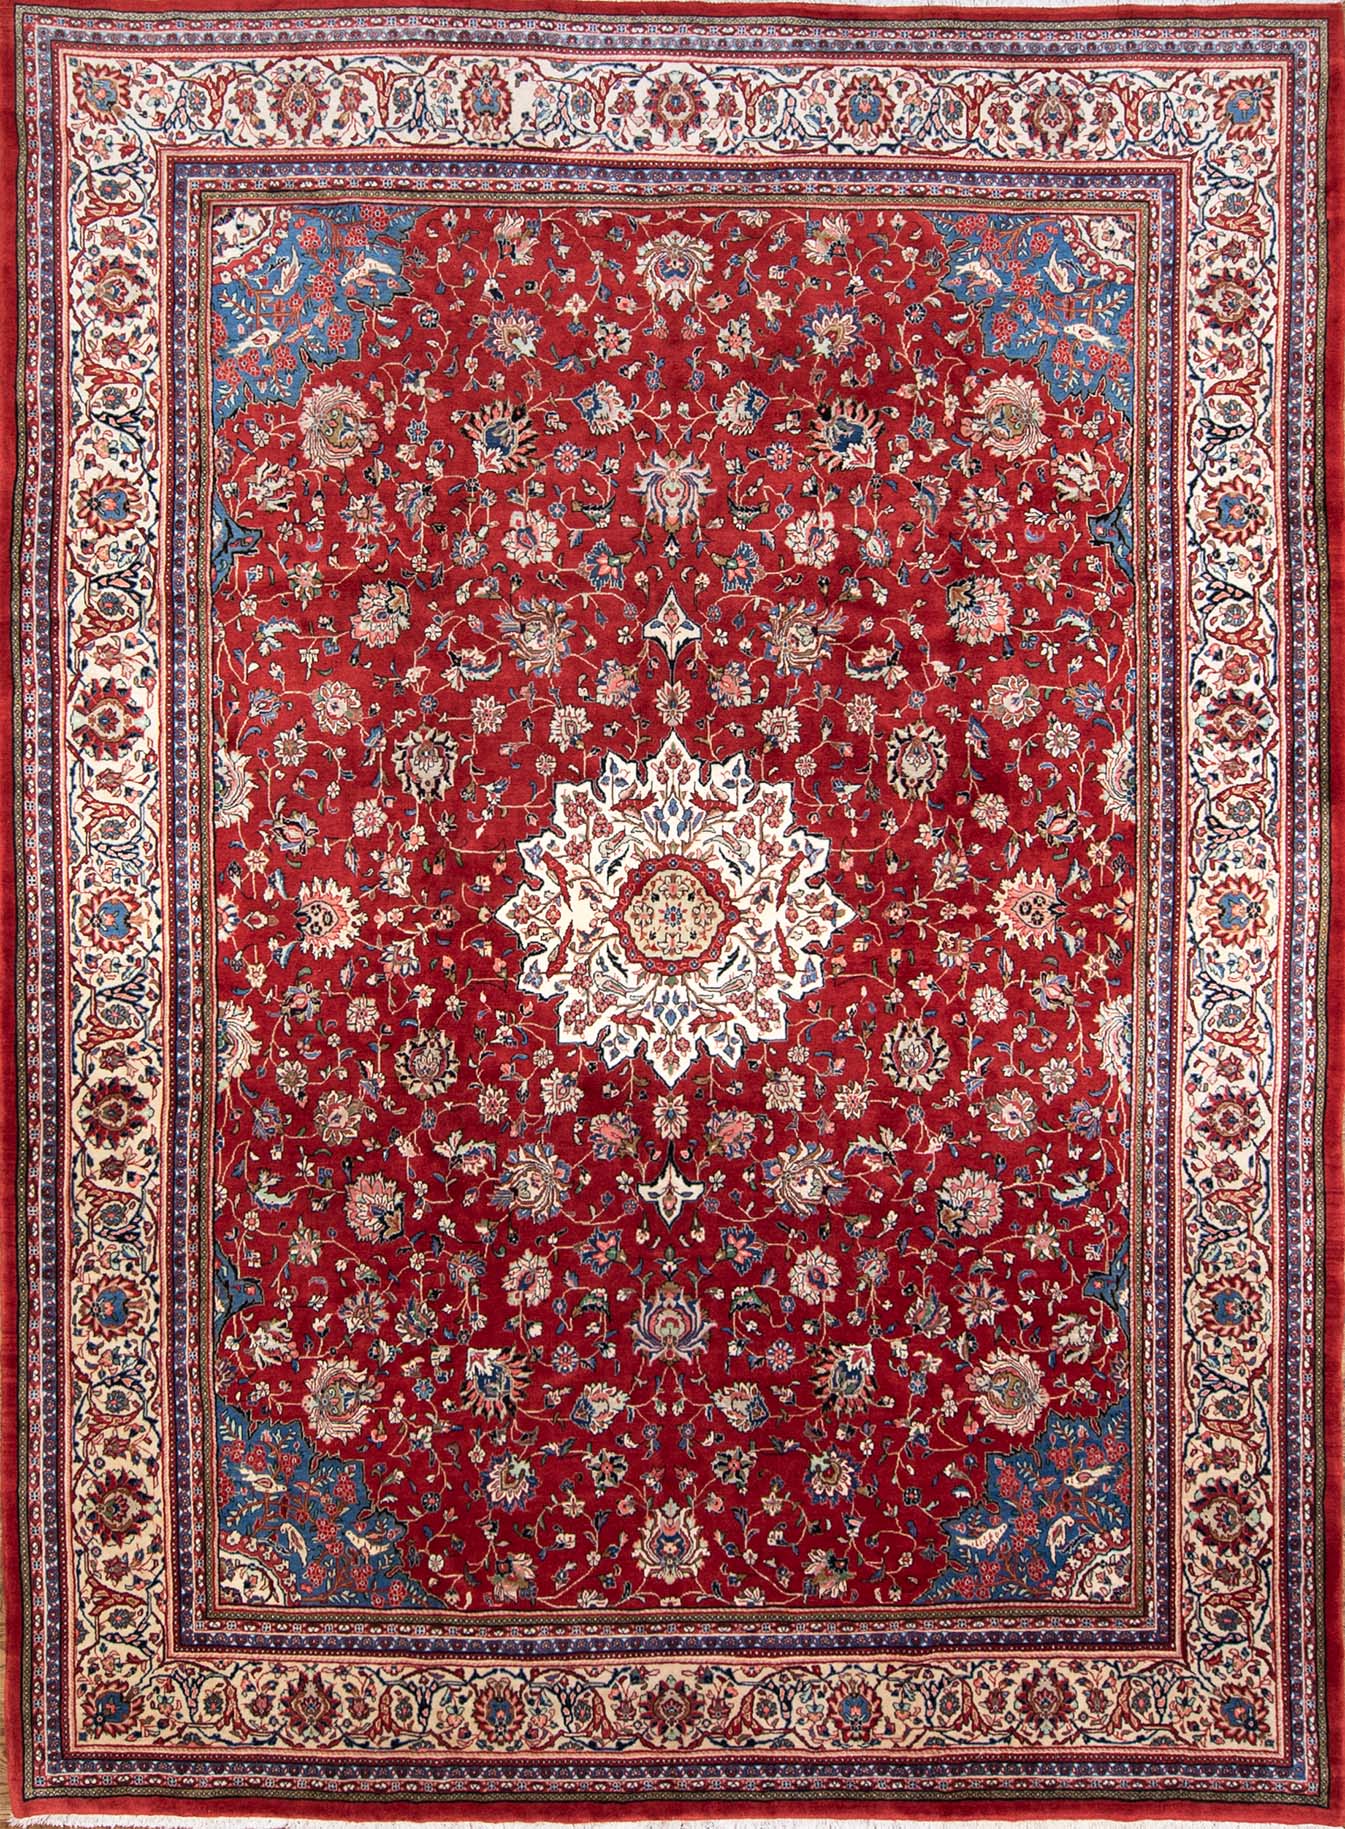 Large area rug. Hand woven floral Persian Sarouk rug in red color made of wool. Size 10.9x14.4.